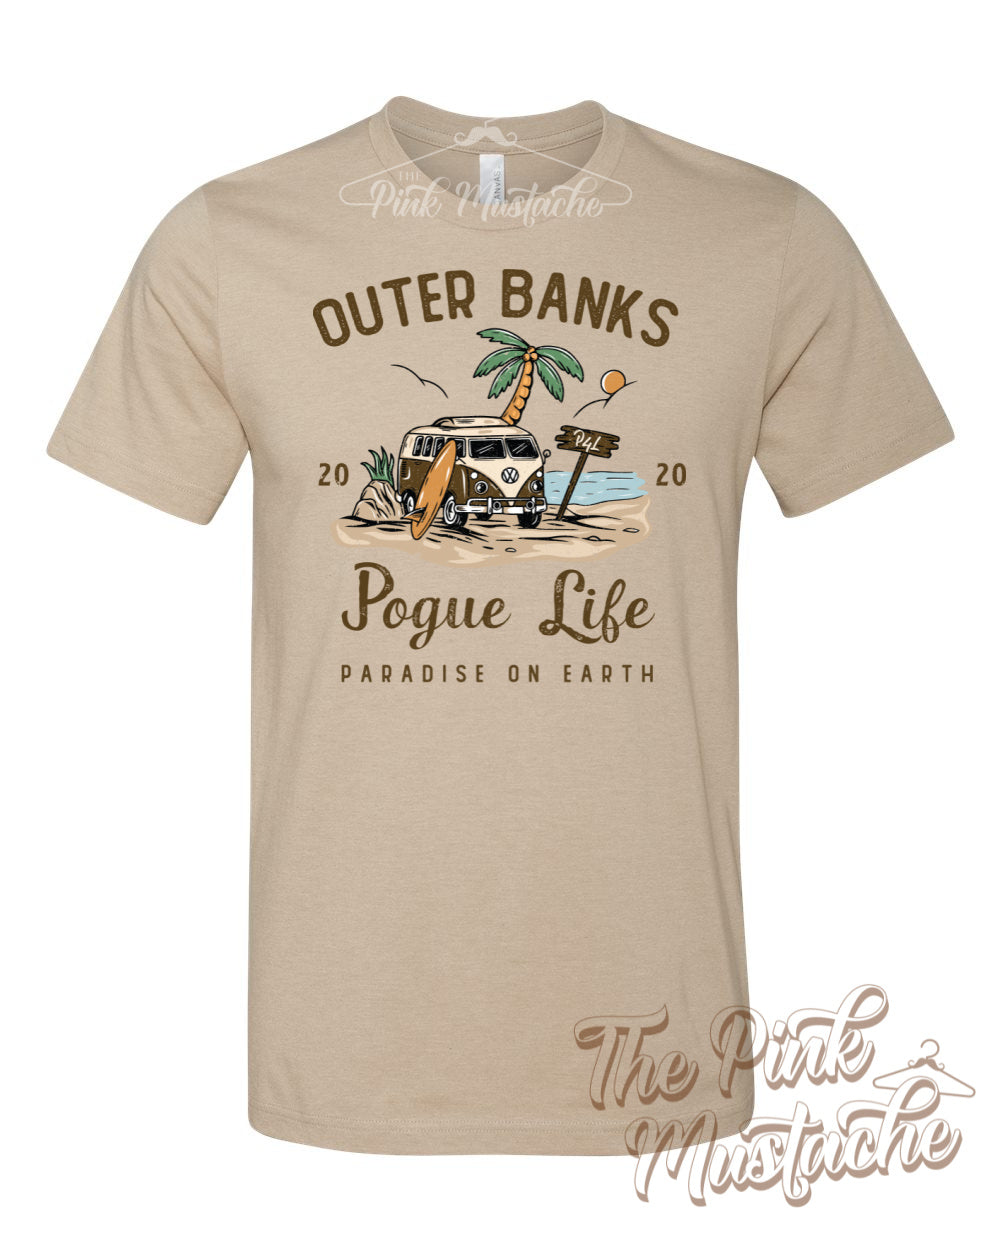 Outer Banks, North Carolina Tee/ Youth and Adult Sizes Available